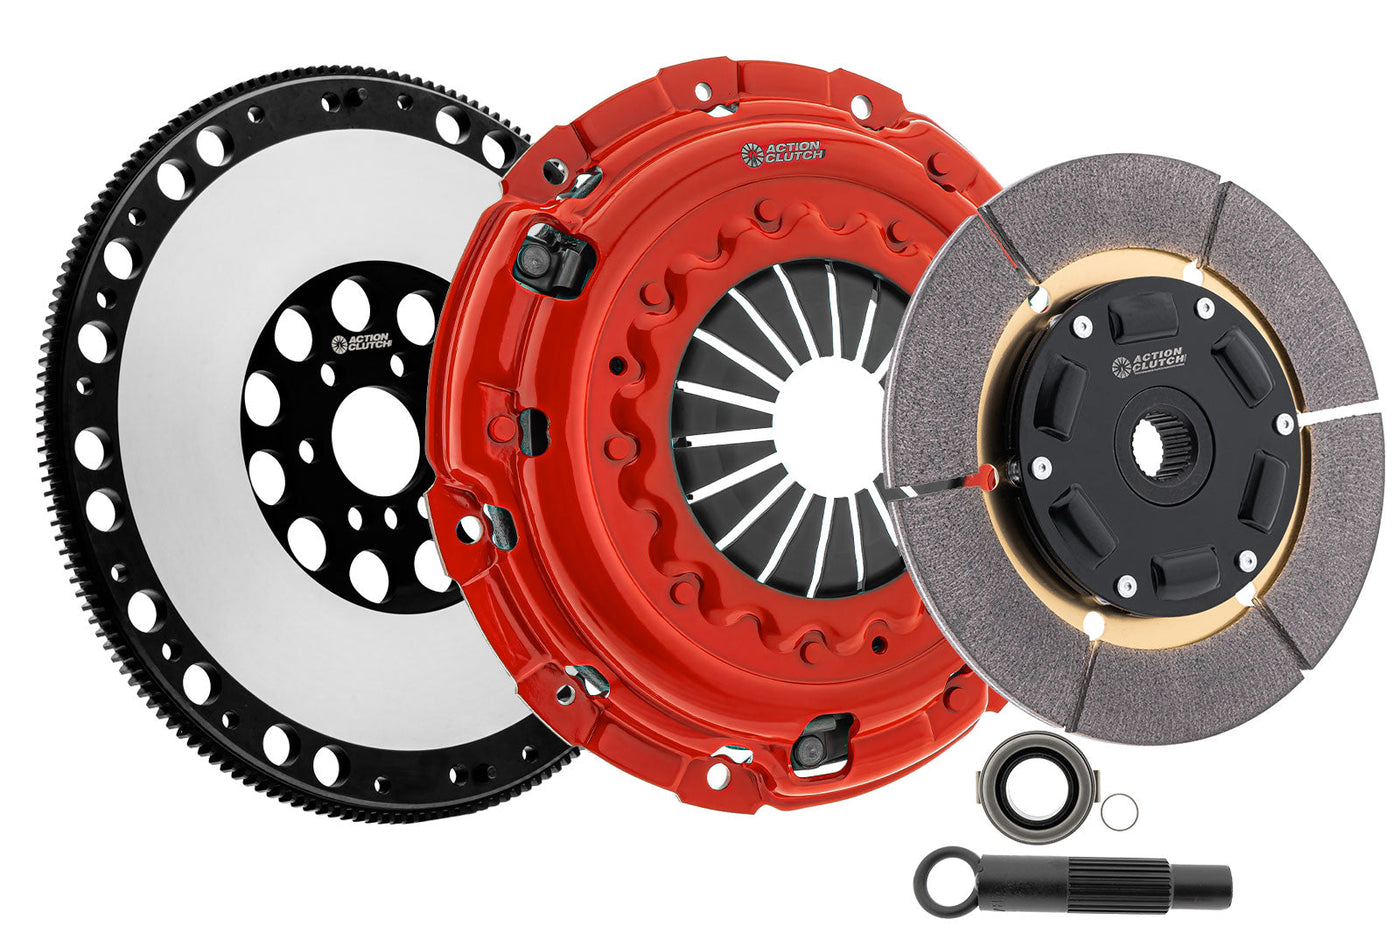 Ironman Sprung (Street) Clutch Kit for Acura TSX 2004-2008 2.4L (K24A2) Includes Lightened Flywheel